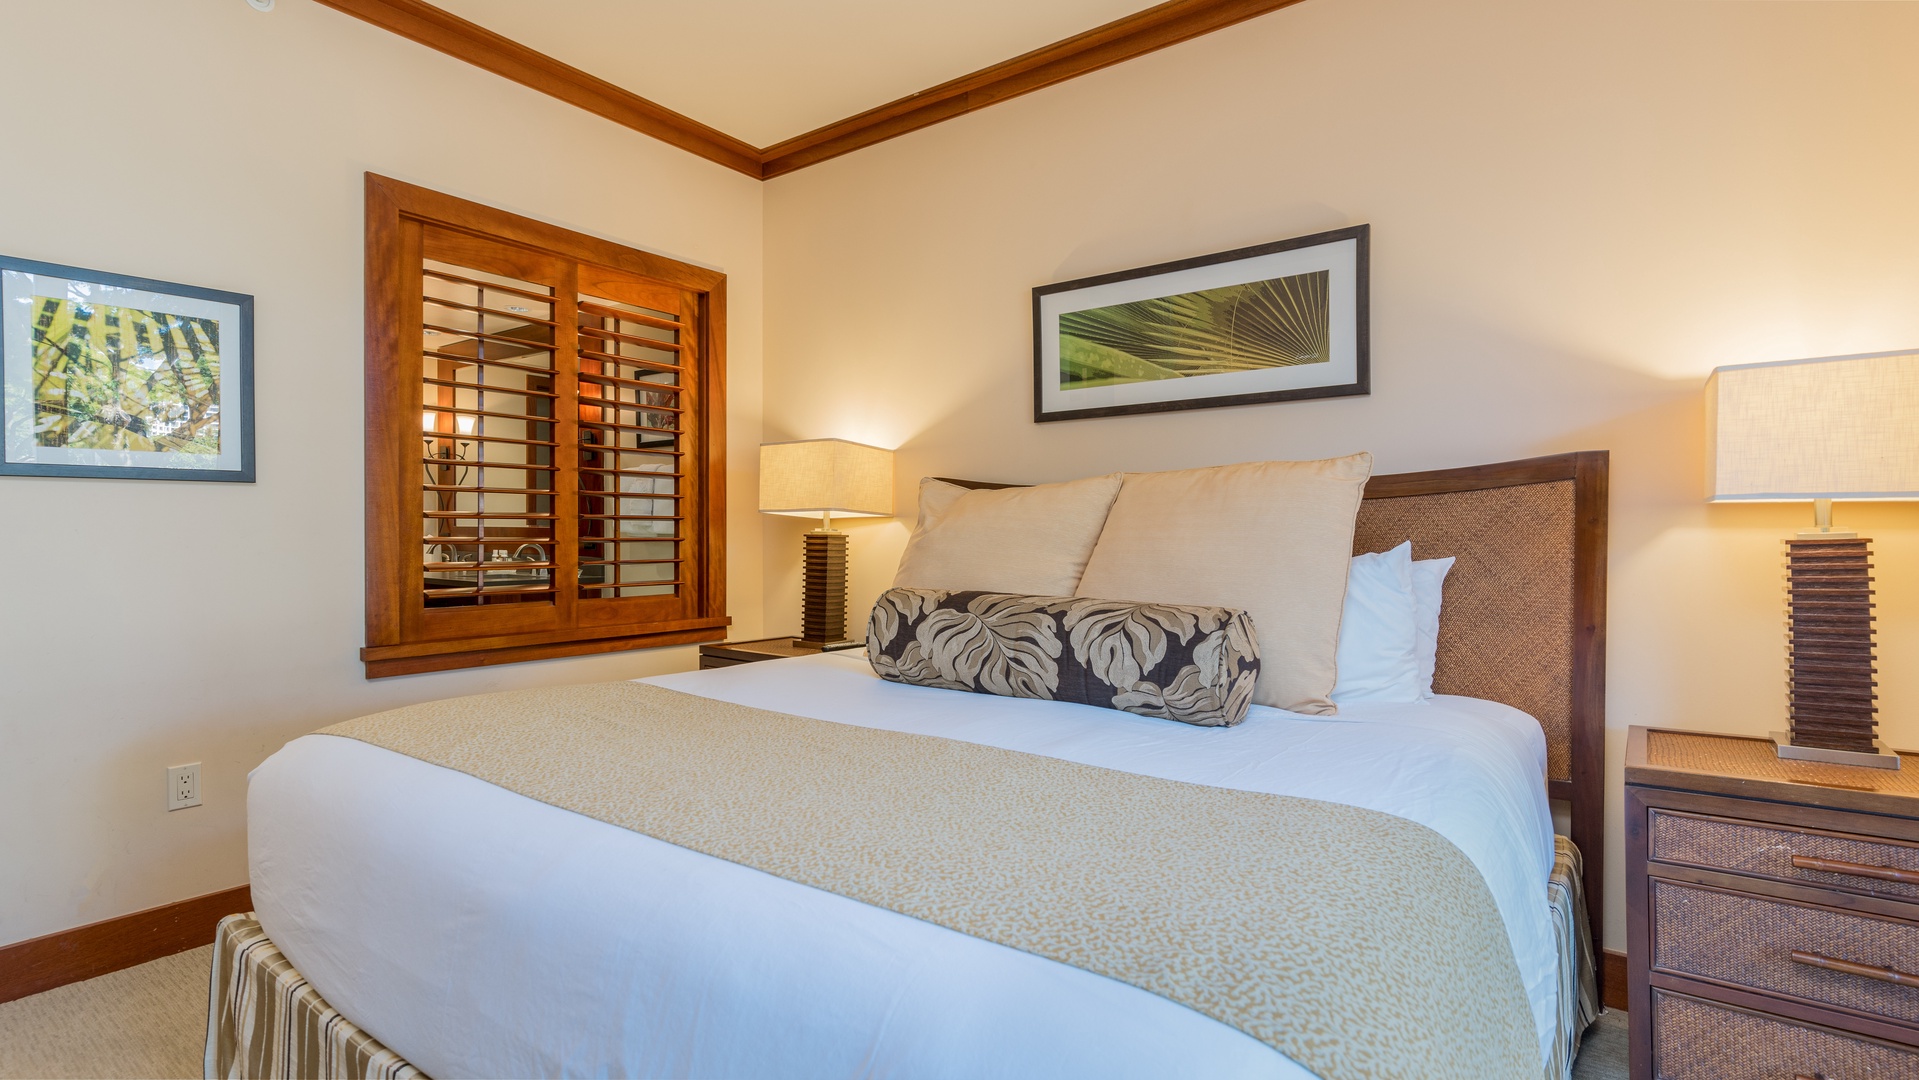 Kapolei Vacation Rentals, Ko Olina Beach Villas B202 - Welcome to your primary guest bedroom with luxurious linens and framed art.